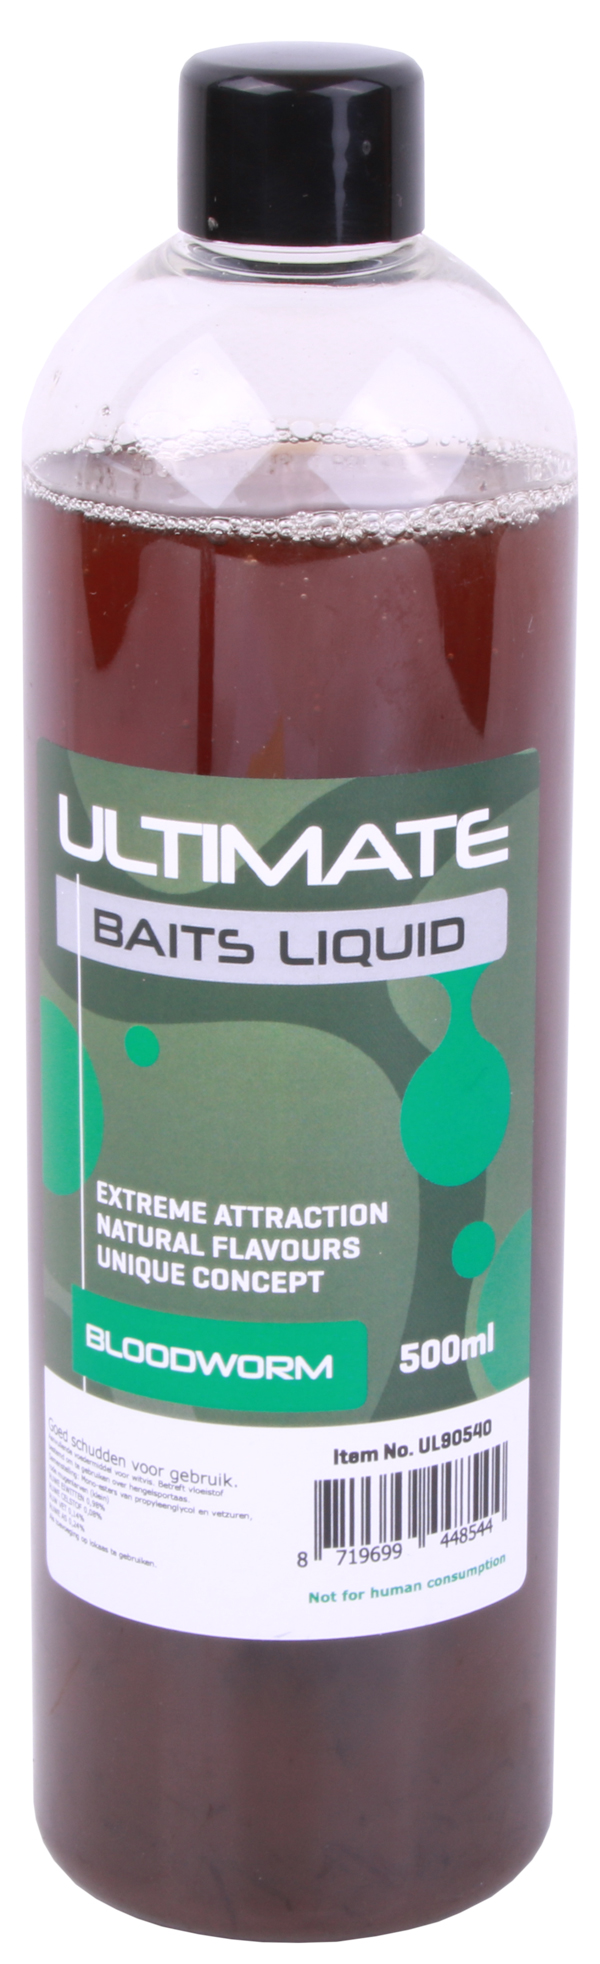 Ultimate Baits Líquido 500ml - Bloodworm